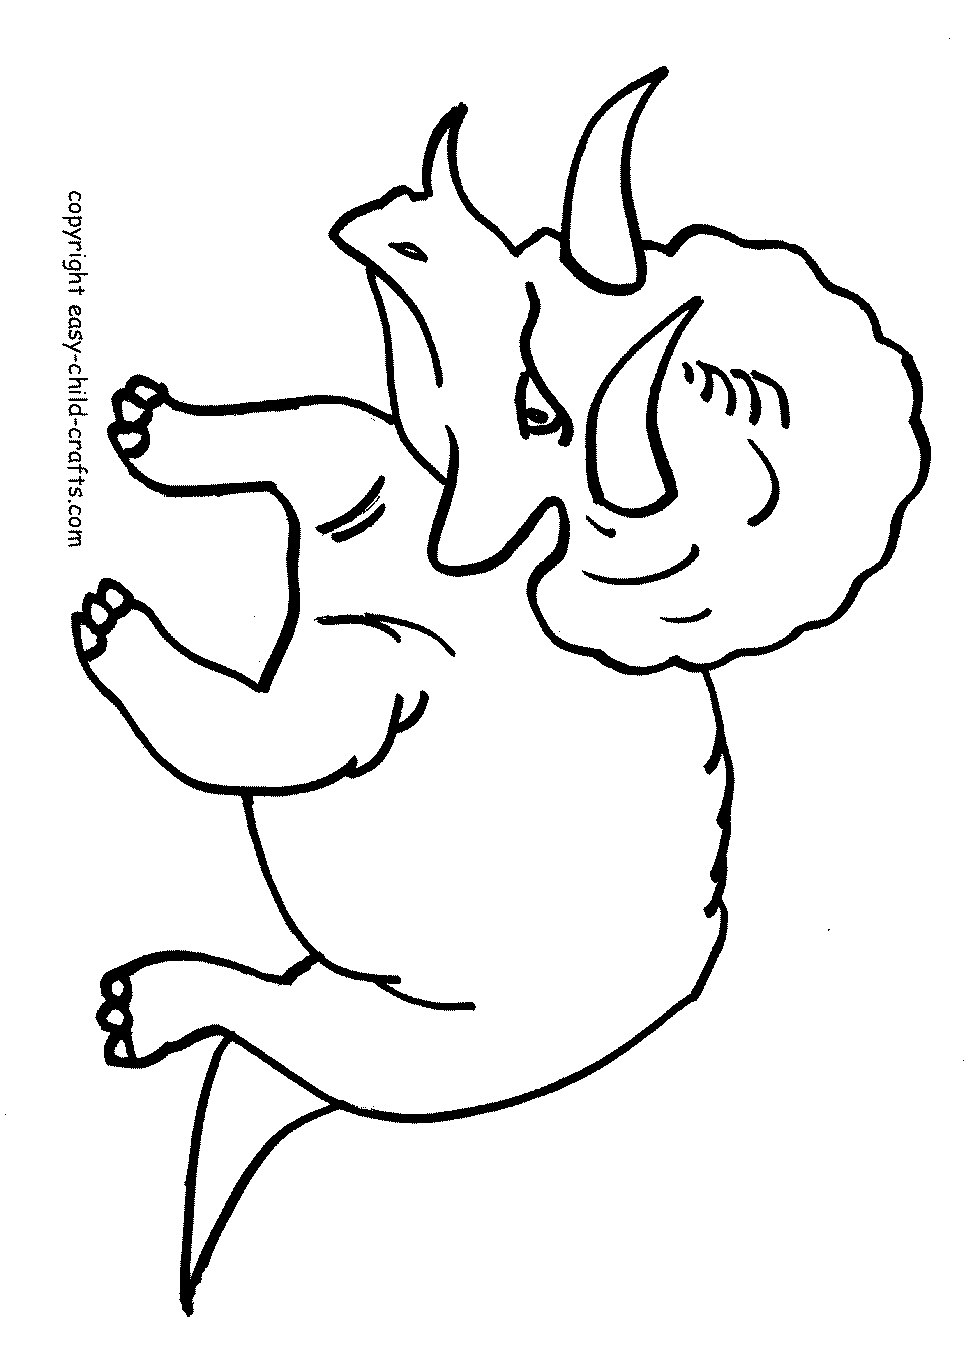 colouring pages dinosaurs printable dinosaur brontosaurus free printable coloring pages pages printable colouring dinosaurs 